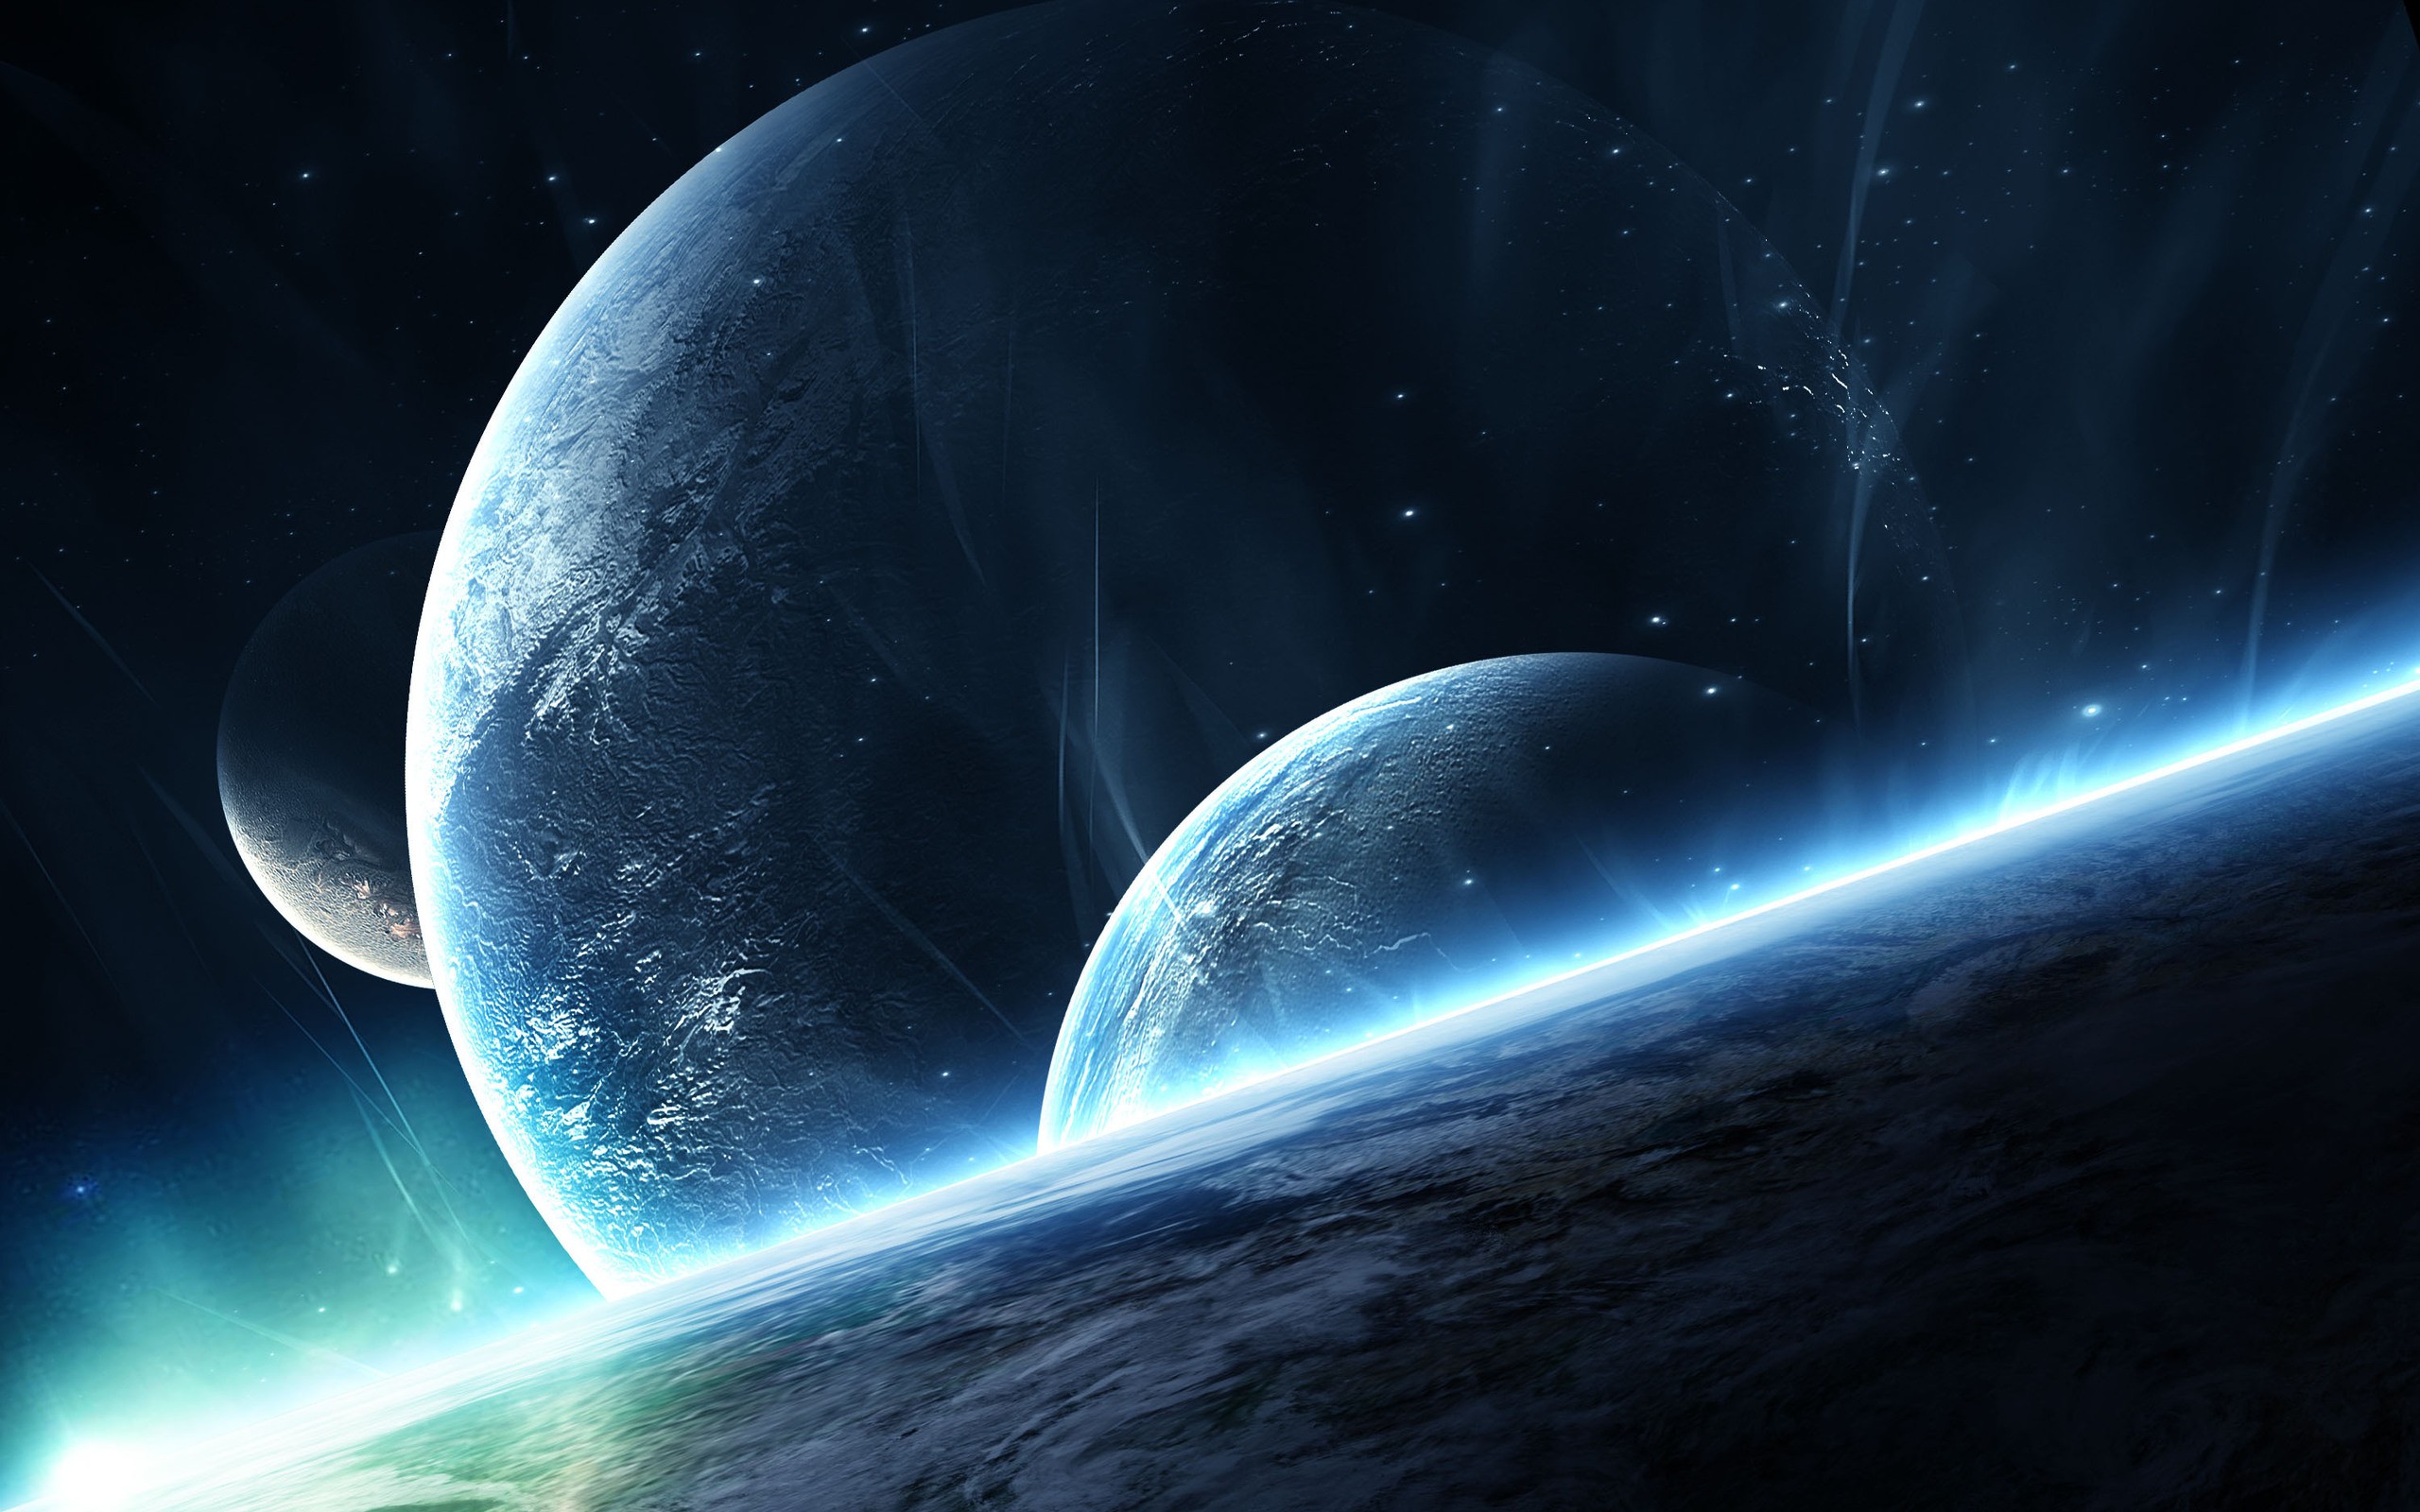 Outer Space Wallpapers   Full HD Desktop Backgrounds 2560x1600